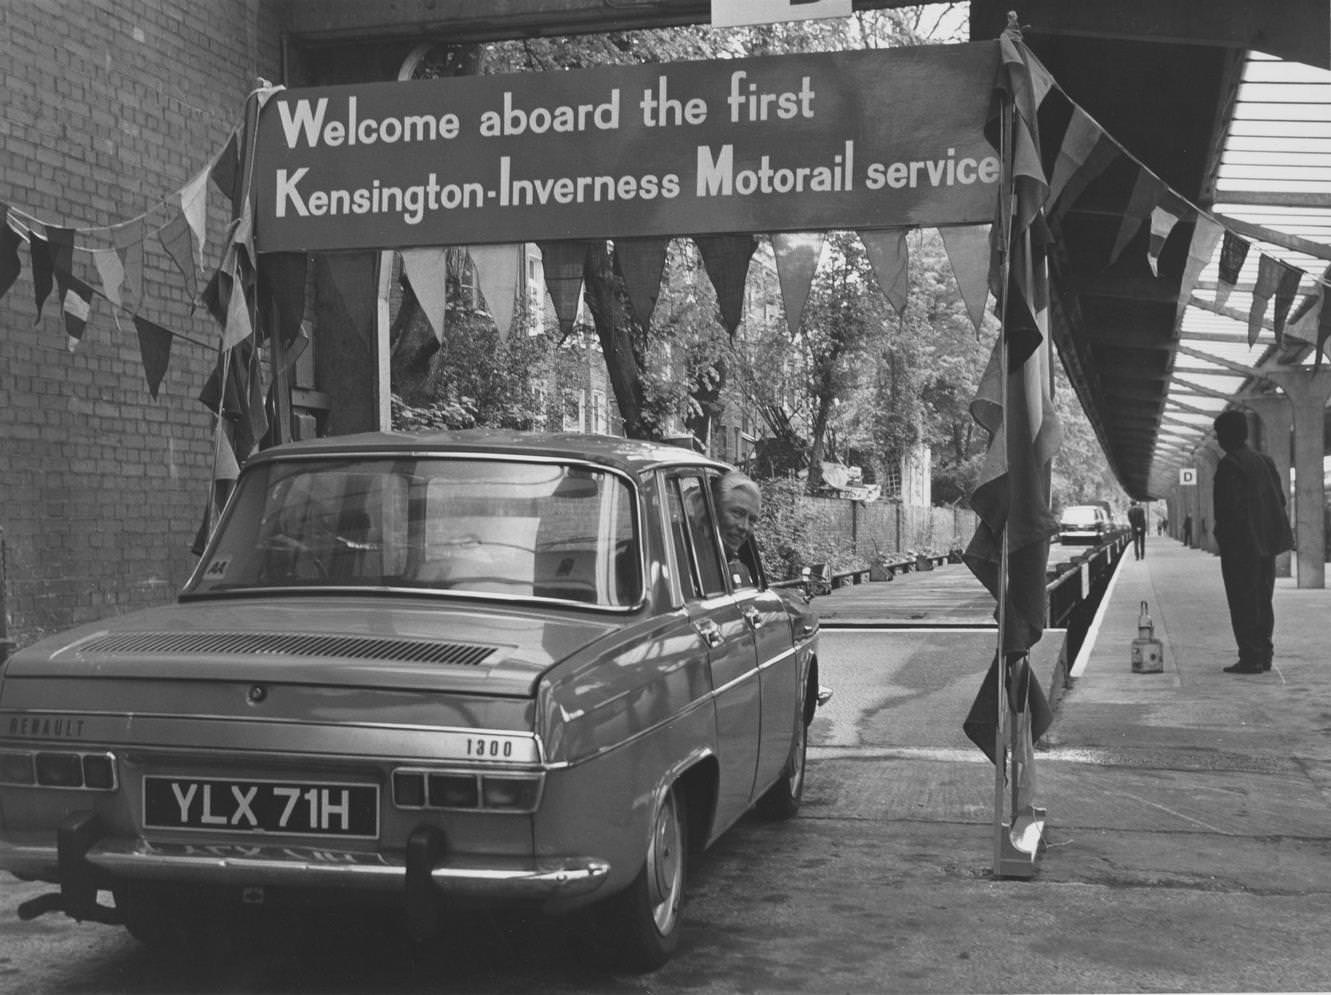 Welcome aboard the first Kensington-Inverness Motorail service . Motorail began in 1955 between King's Cross and Perth, 1960s